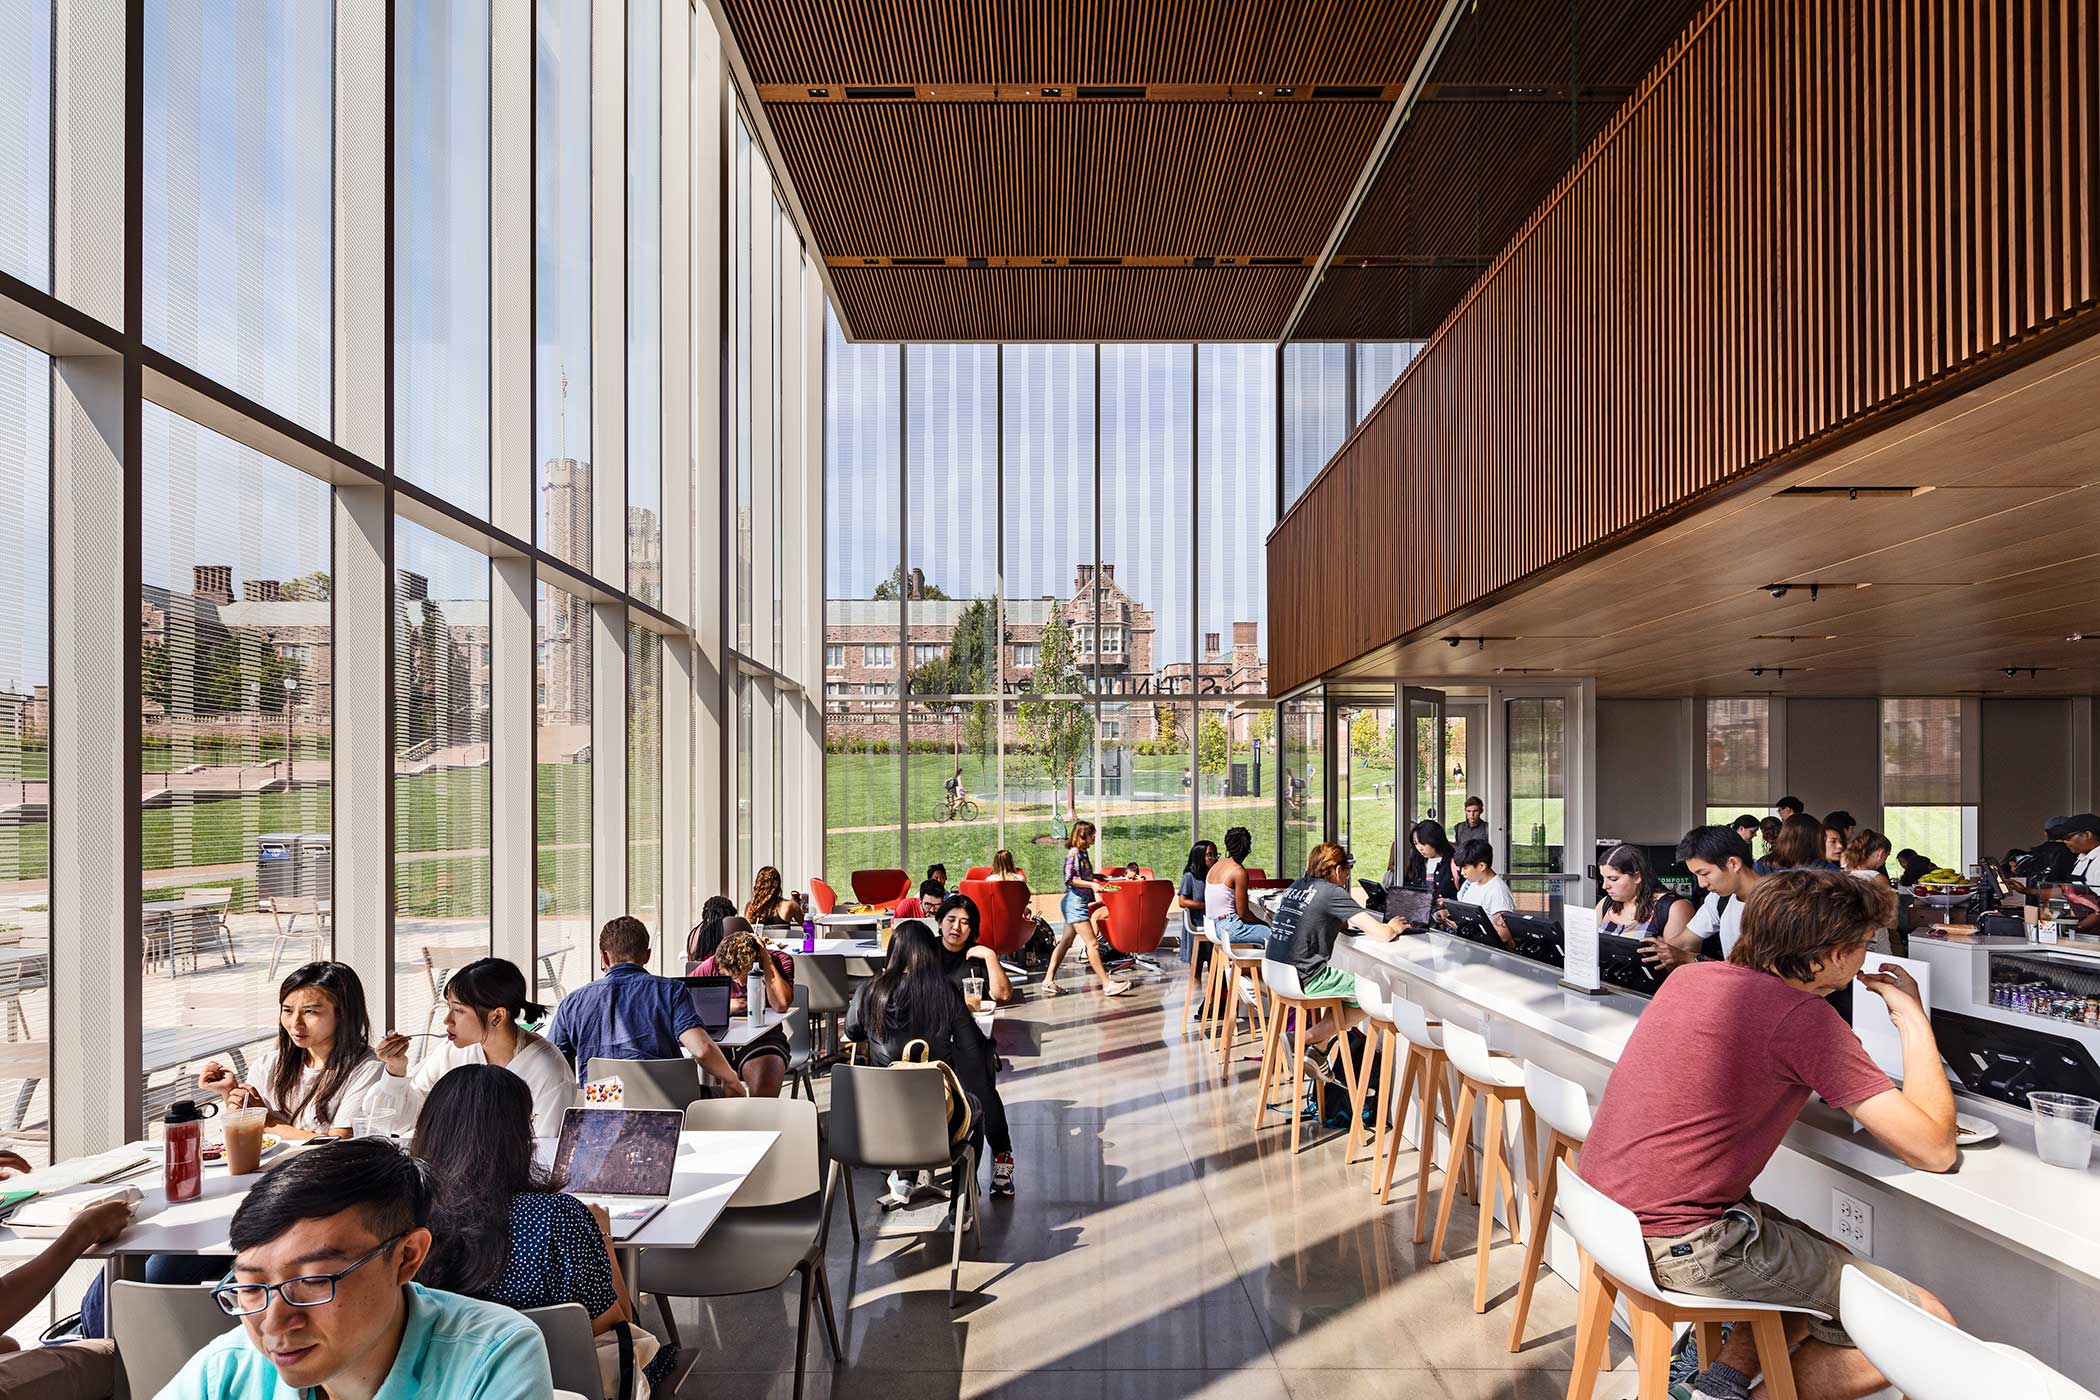 <p>Designed to be the East End's center of student life, the Schnuck Pavilion houses the Environmental Studies Program and the Office of Sustainability, as well as a bicycle commuter hub and a large cafe with indoor and outdoor seating. <br><small>&copy; James Ewing/JBSA</small> &nbsp;<br /></p>